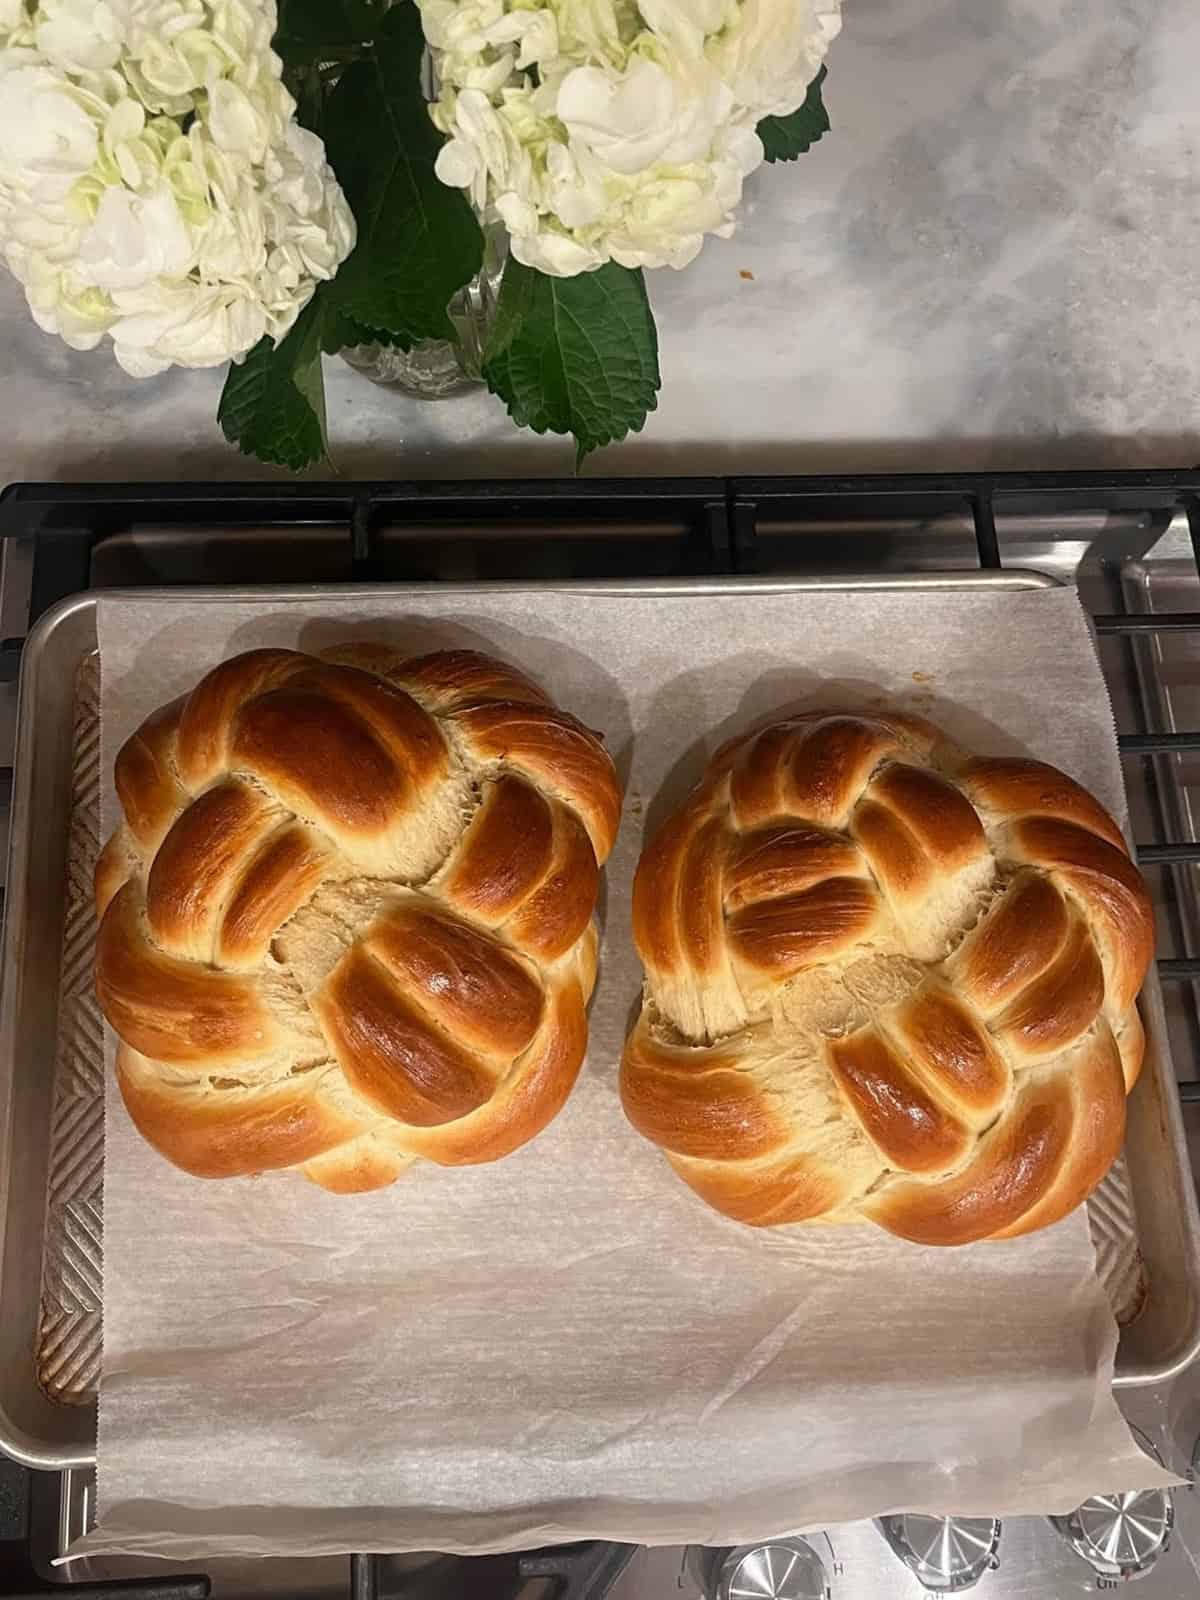 Two round braided loaves of challah bread.